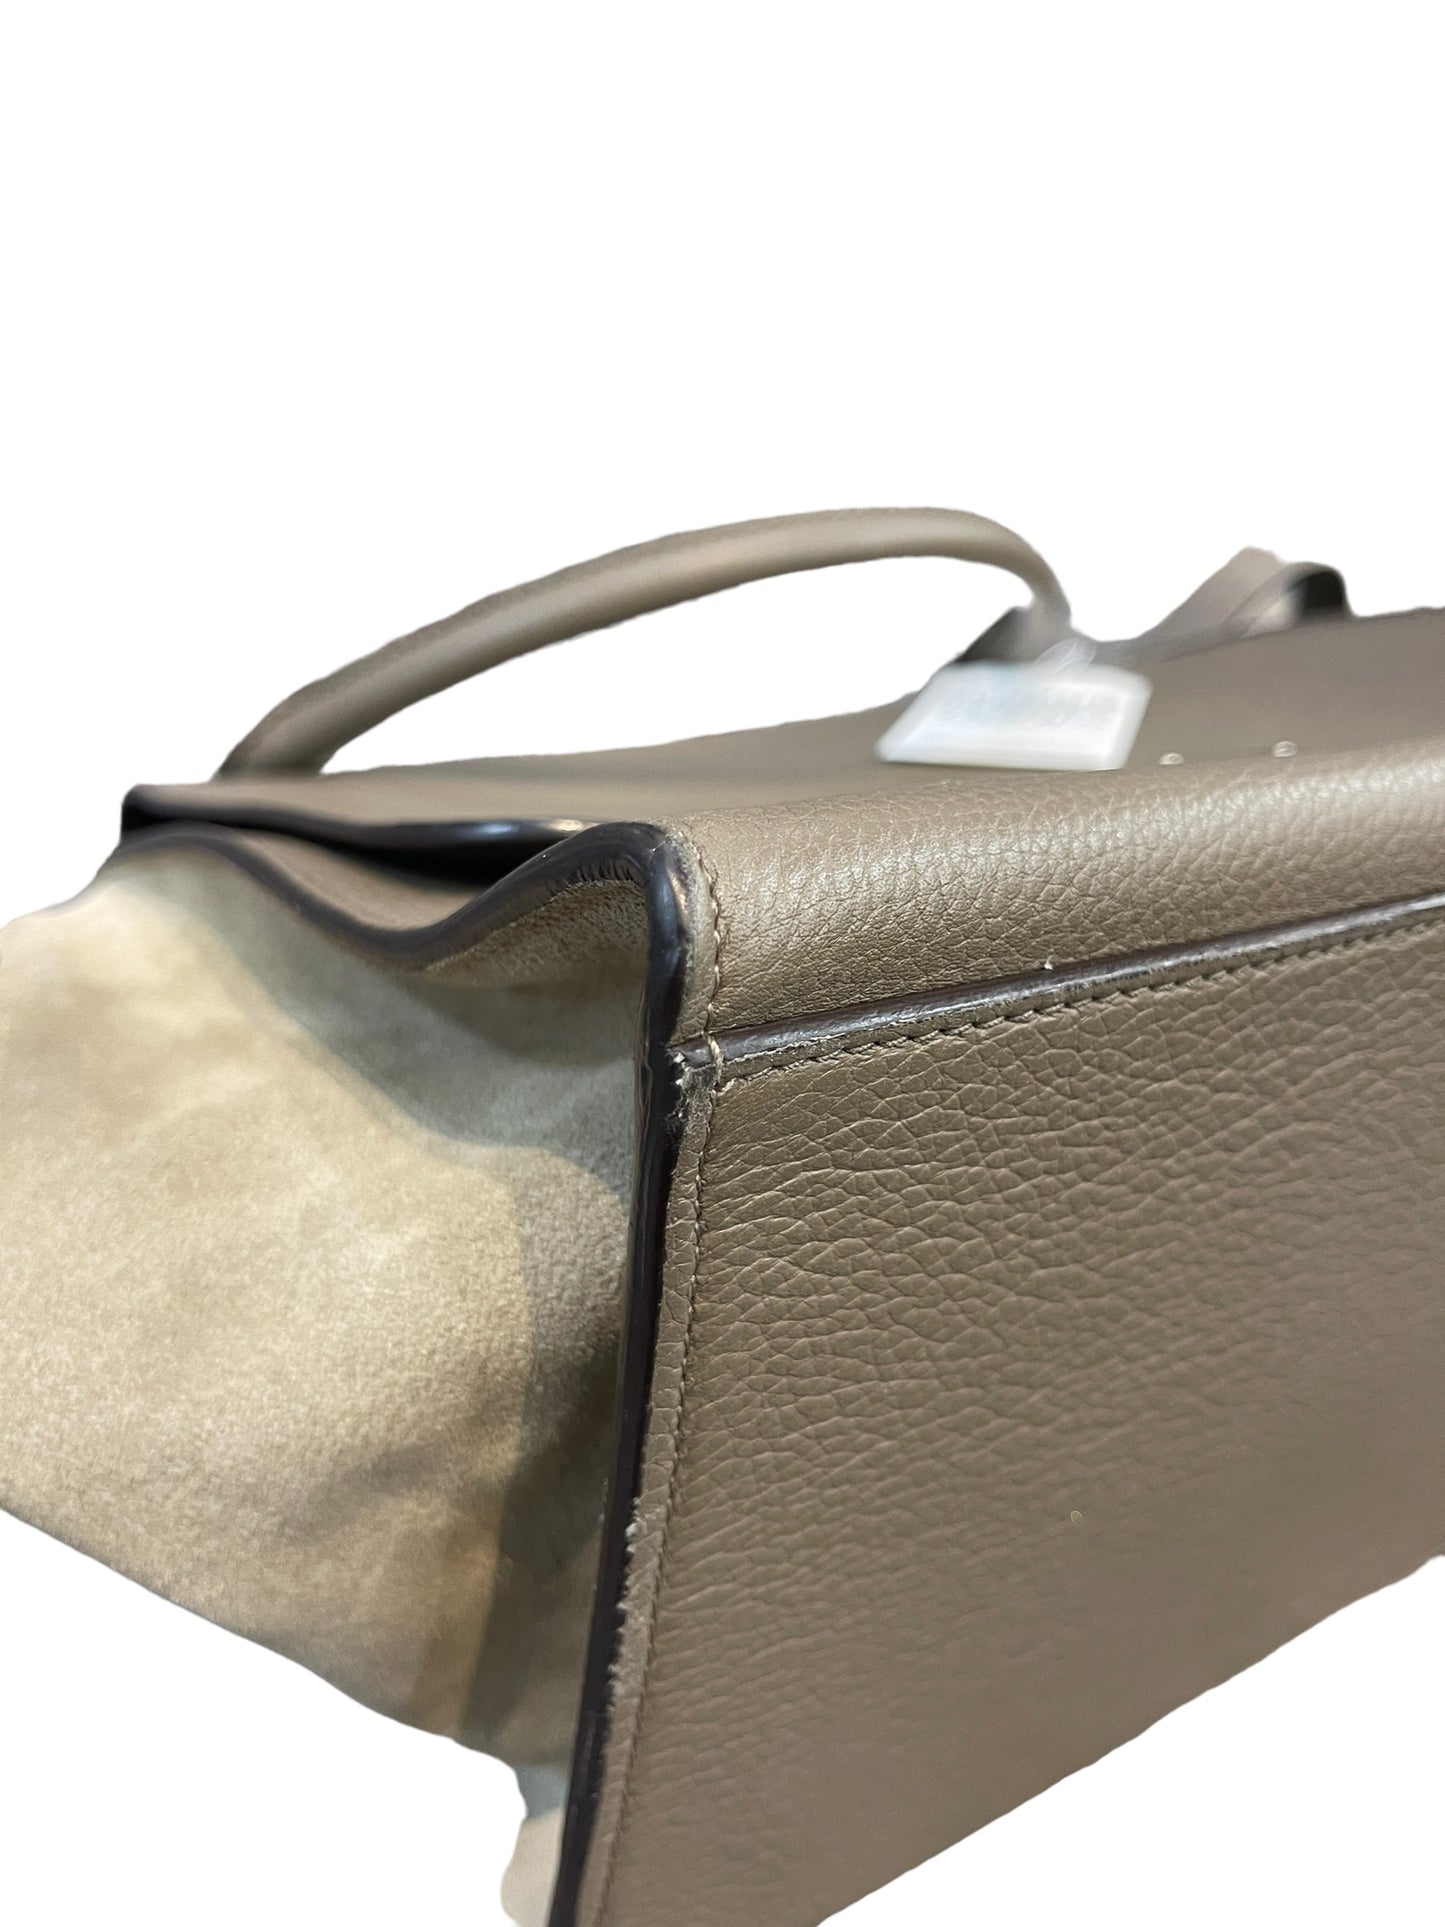 Celine - Trapeze Bag in Light Gray Leather & Suede 1403302